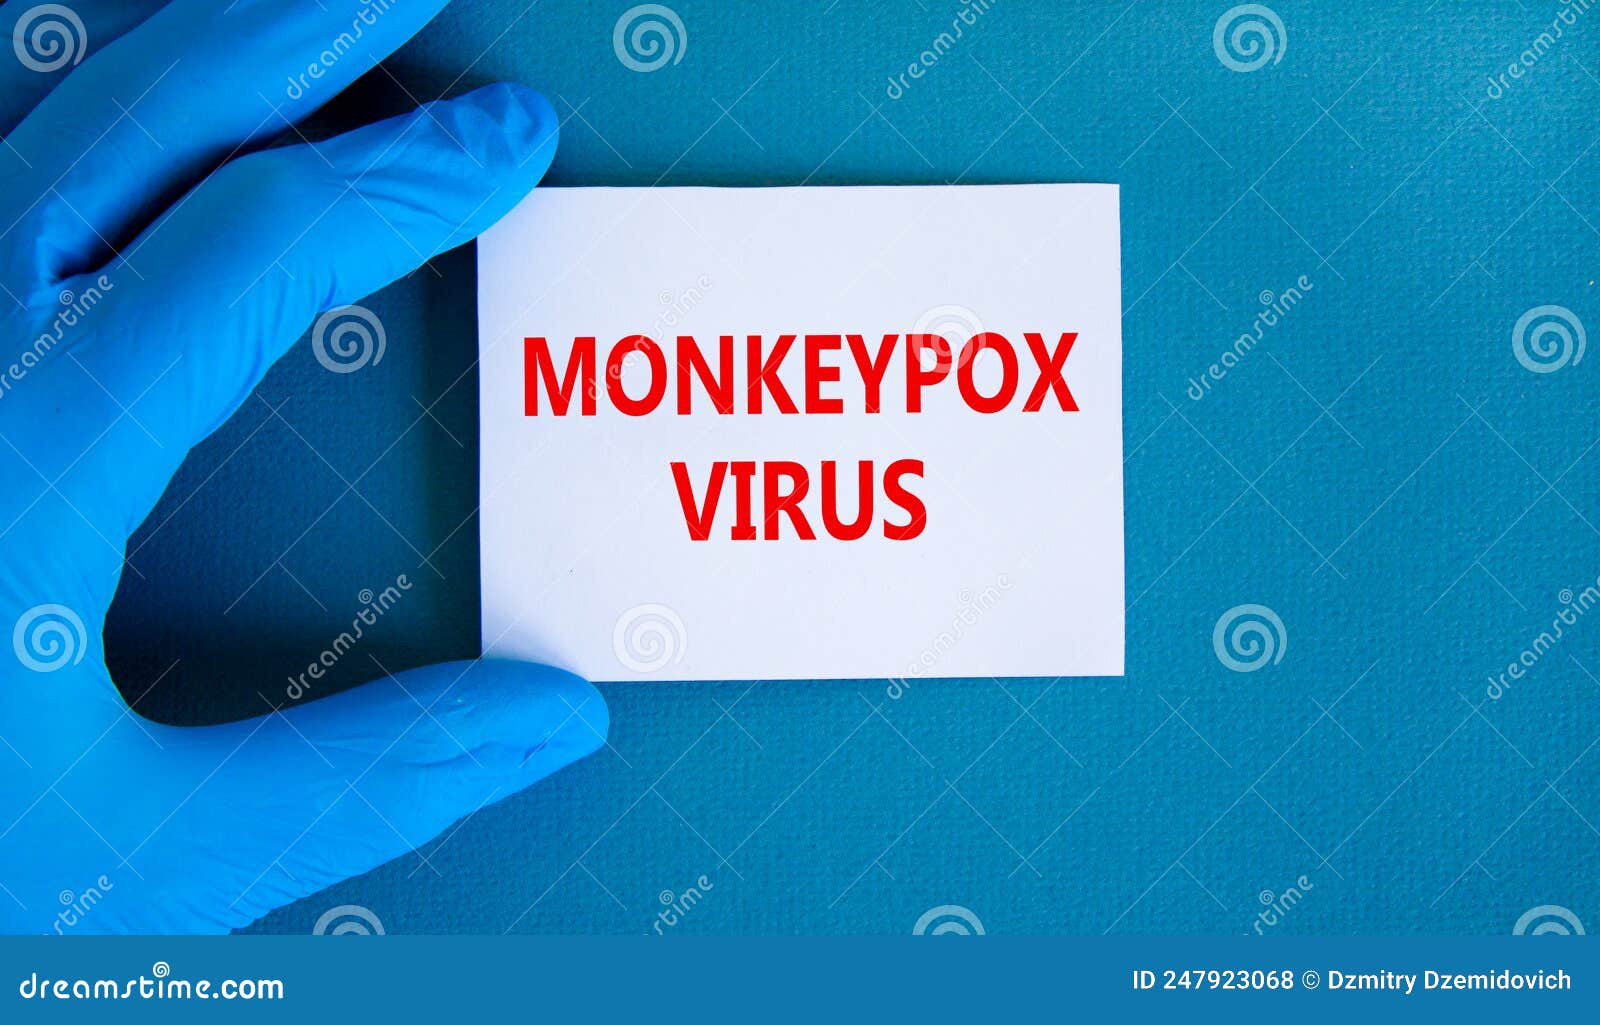 monkeypox virus . concept words monkeypox virus on white card. doctor hand in blue glove with white card. medical and